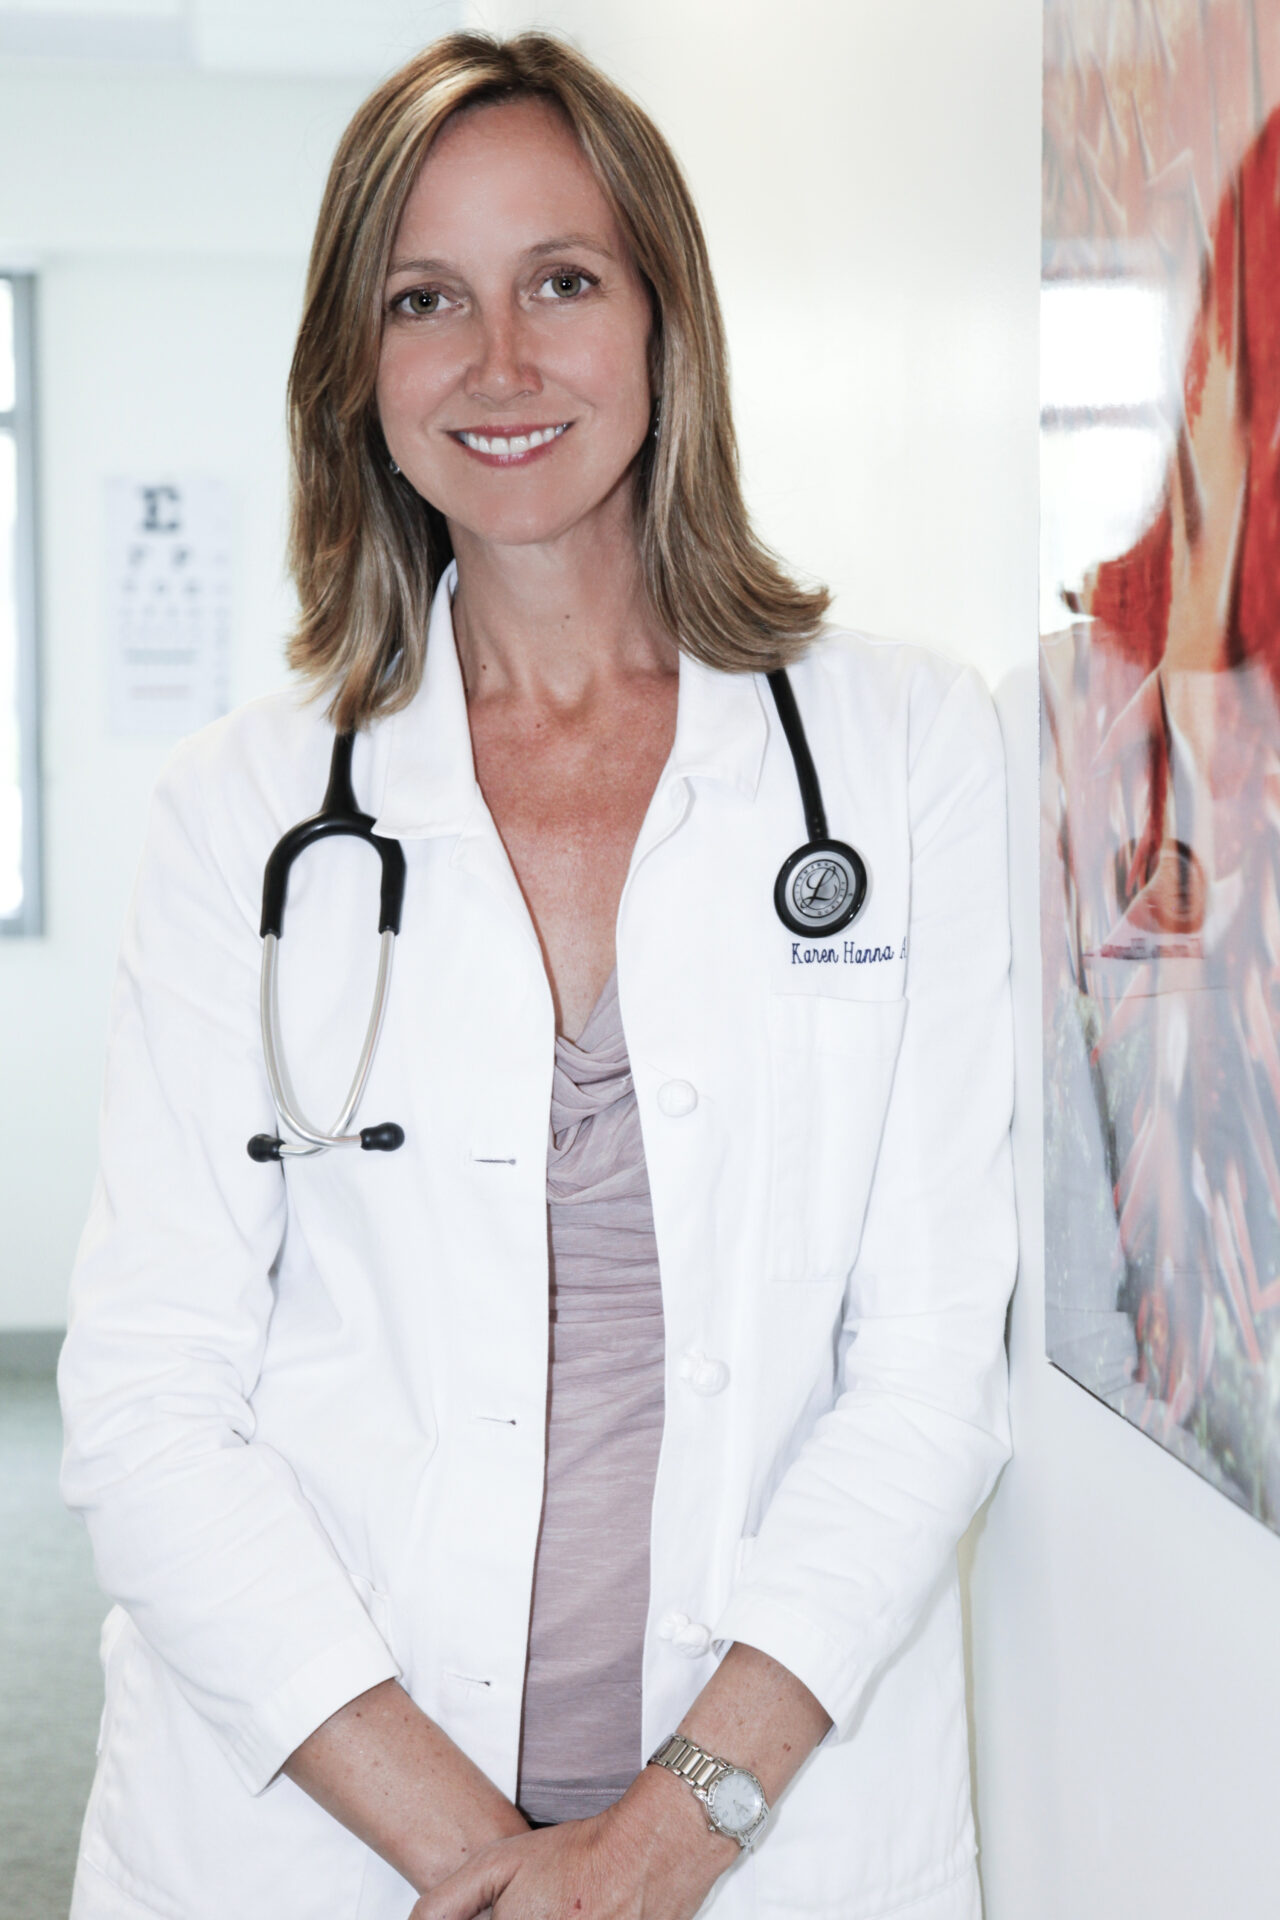 A woman wearing a white coat and a stethoscope.